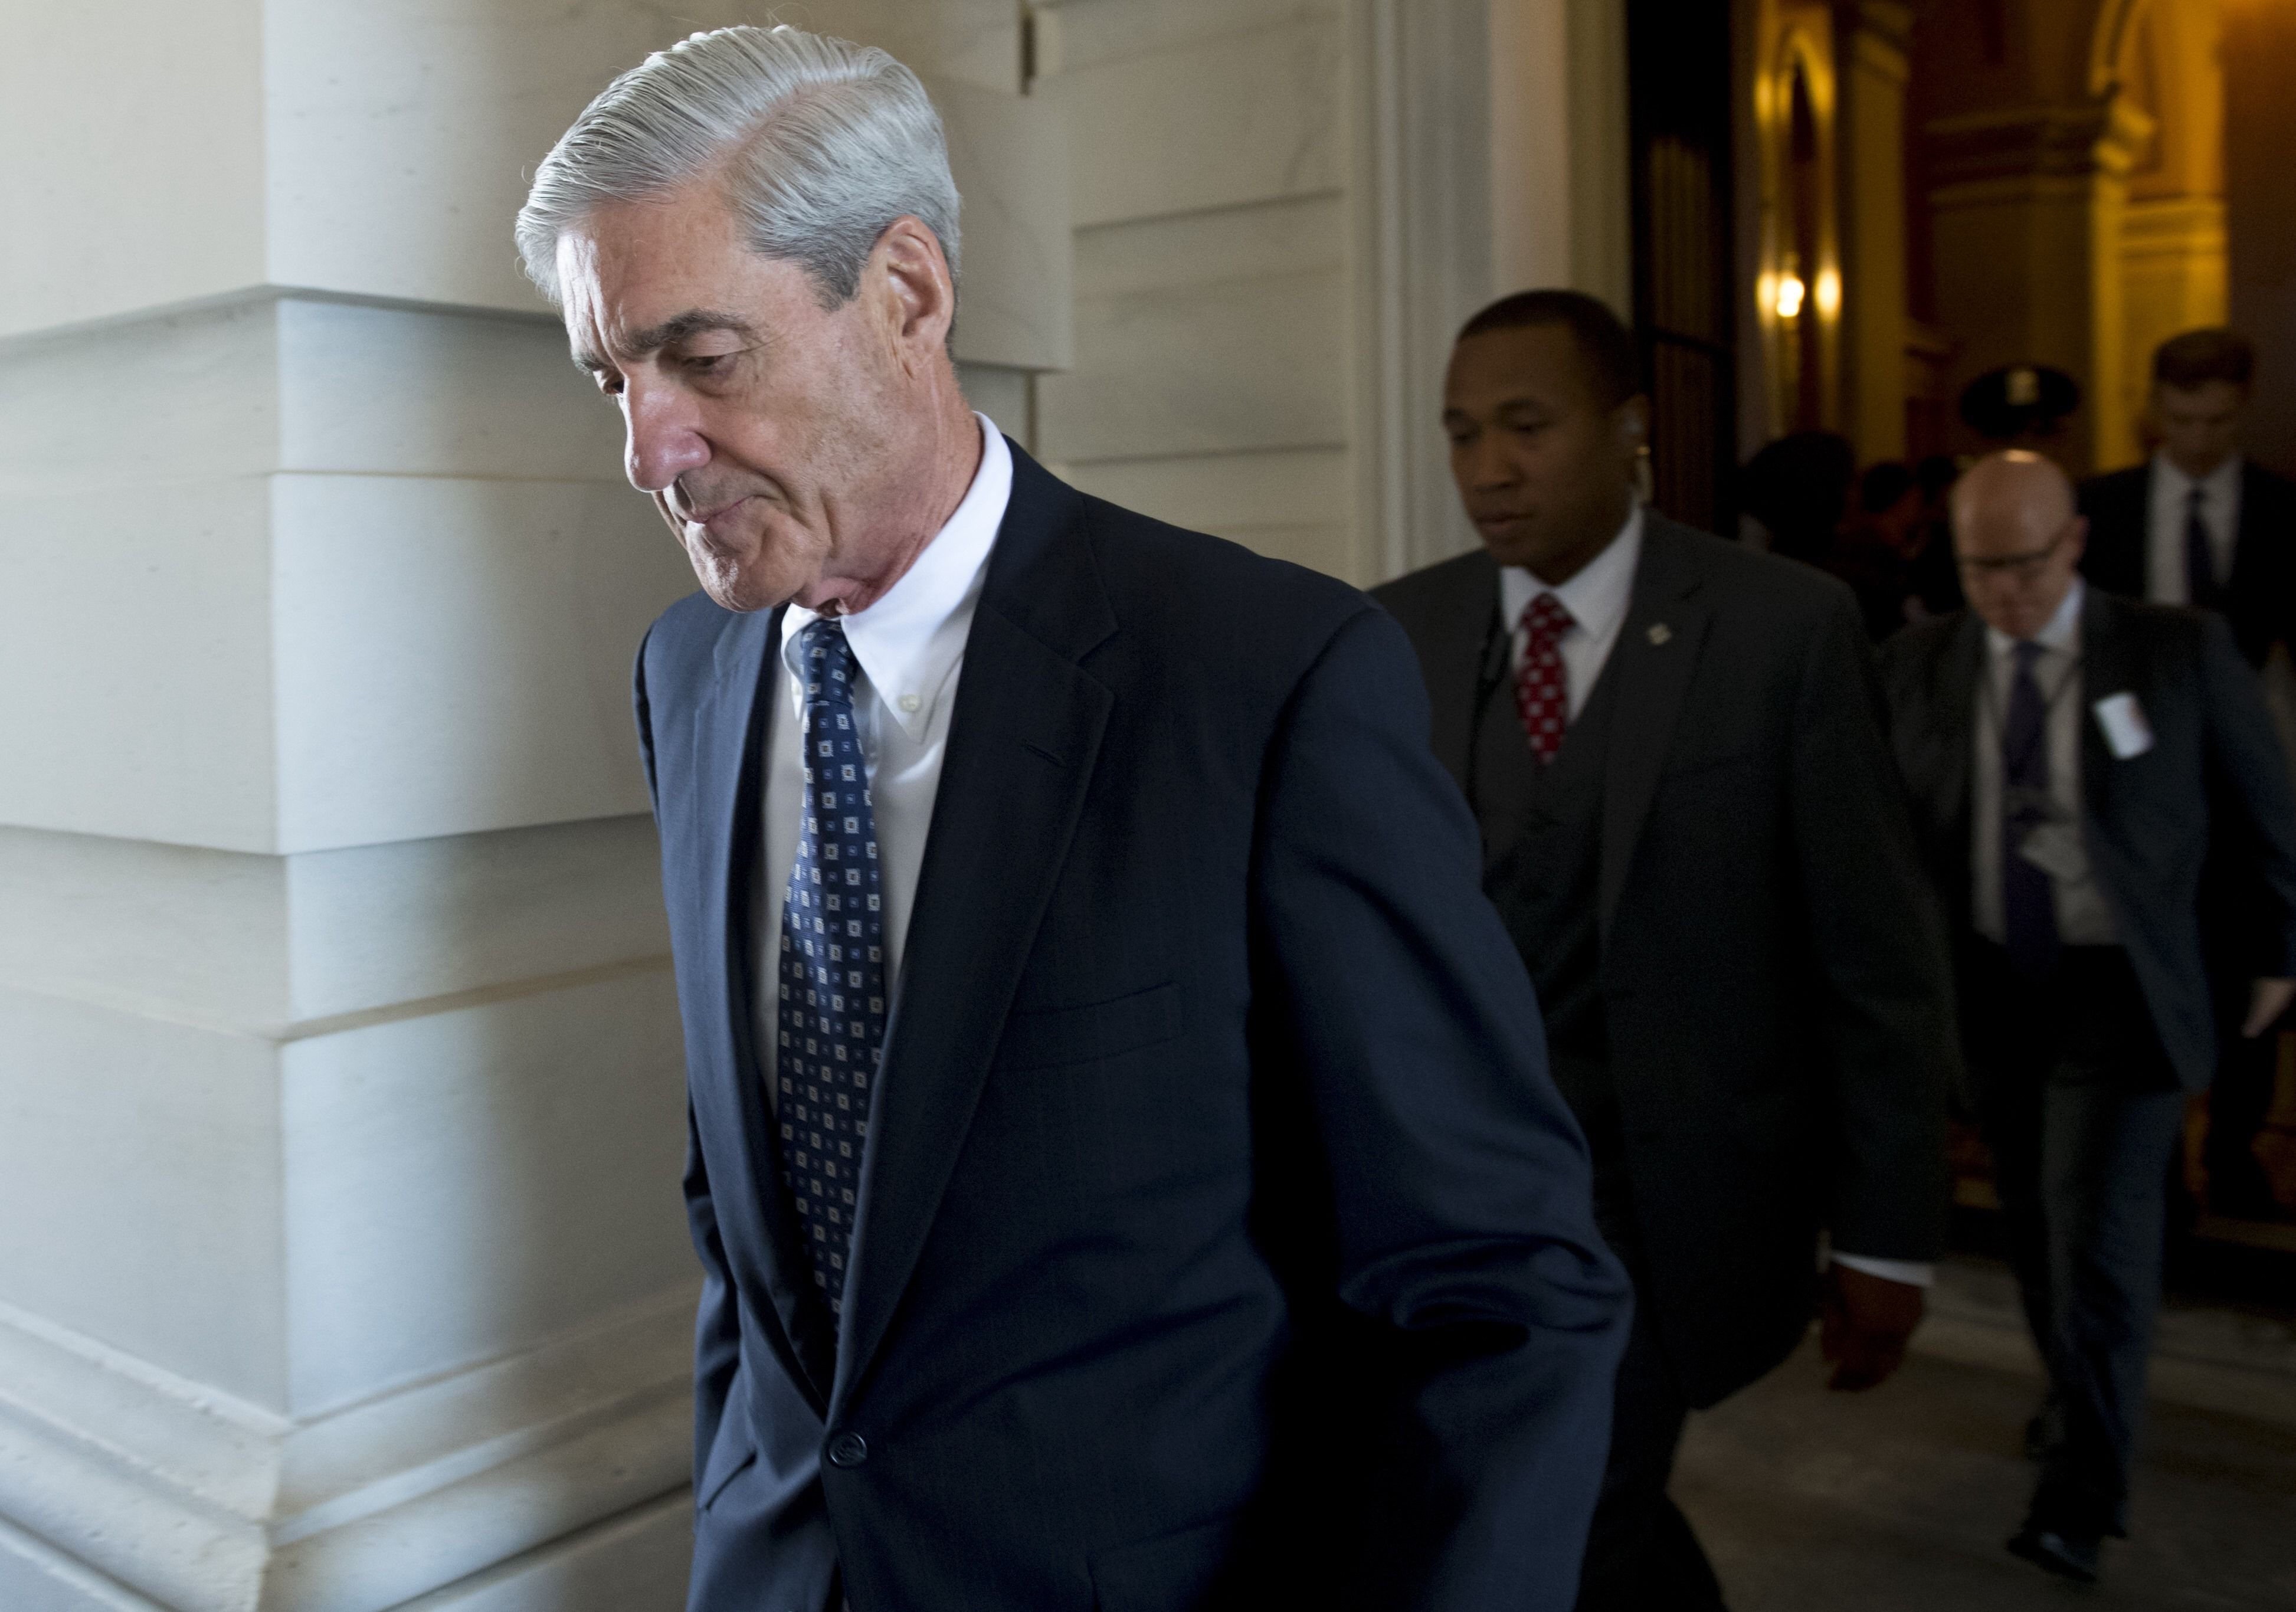 Special counsel Robert Mueller charges Russian ‘troll farm’ with election interference